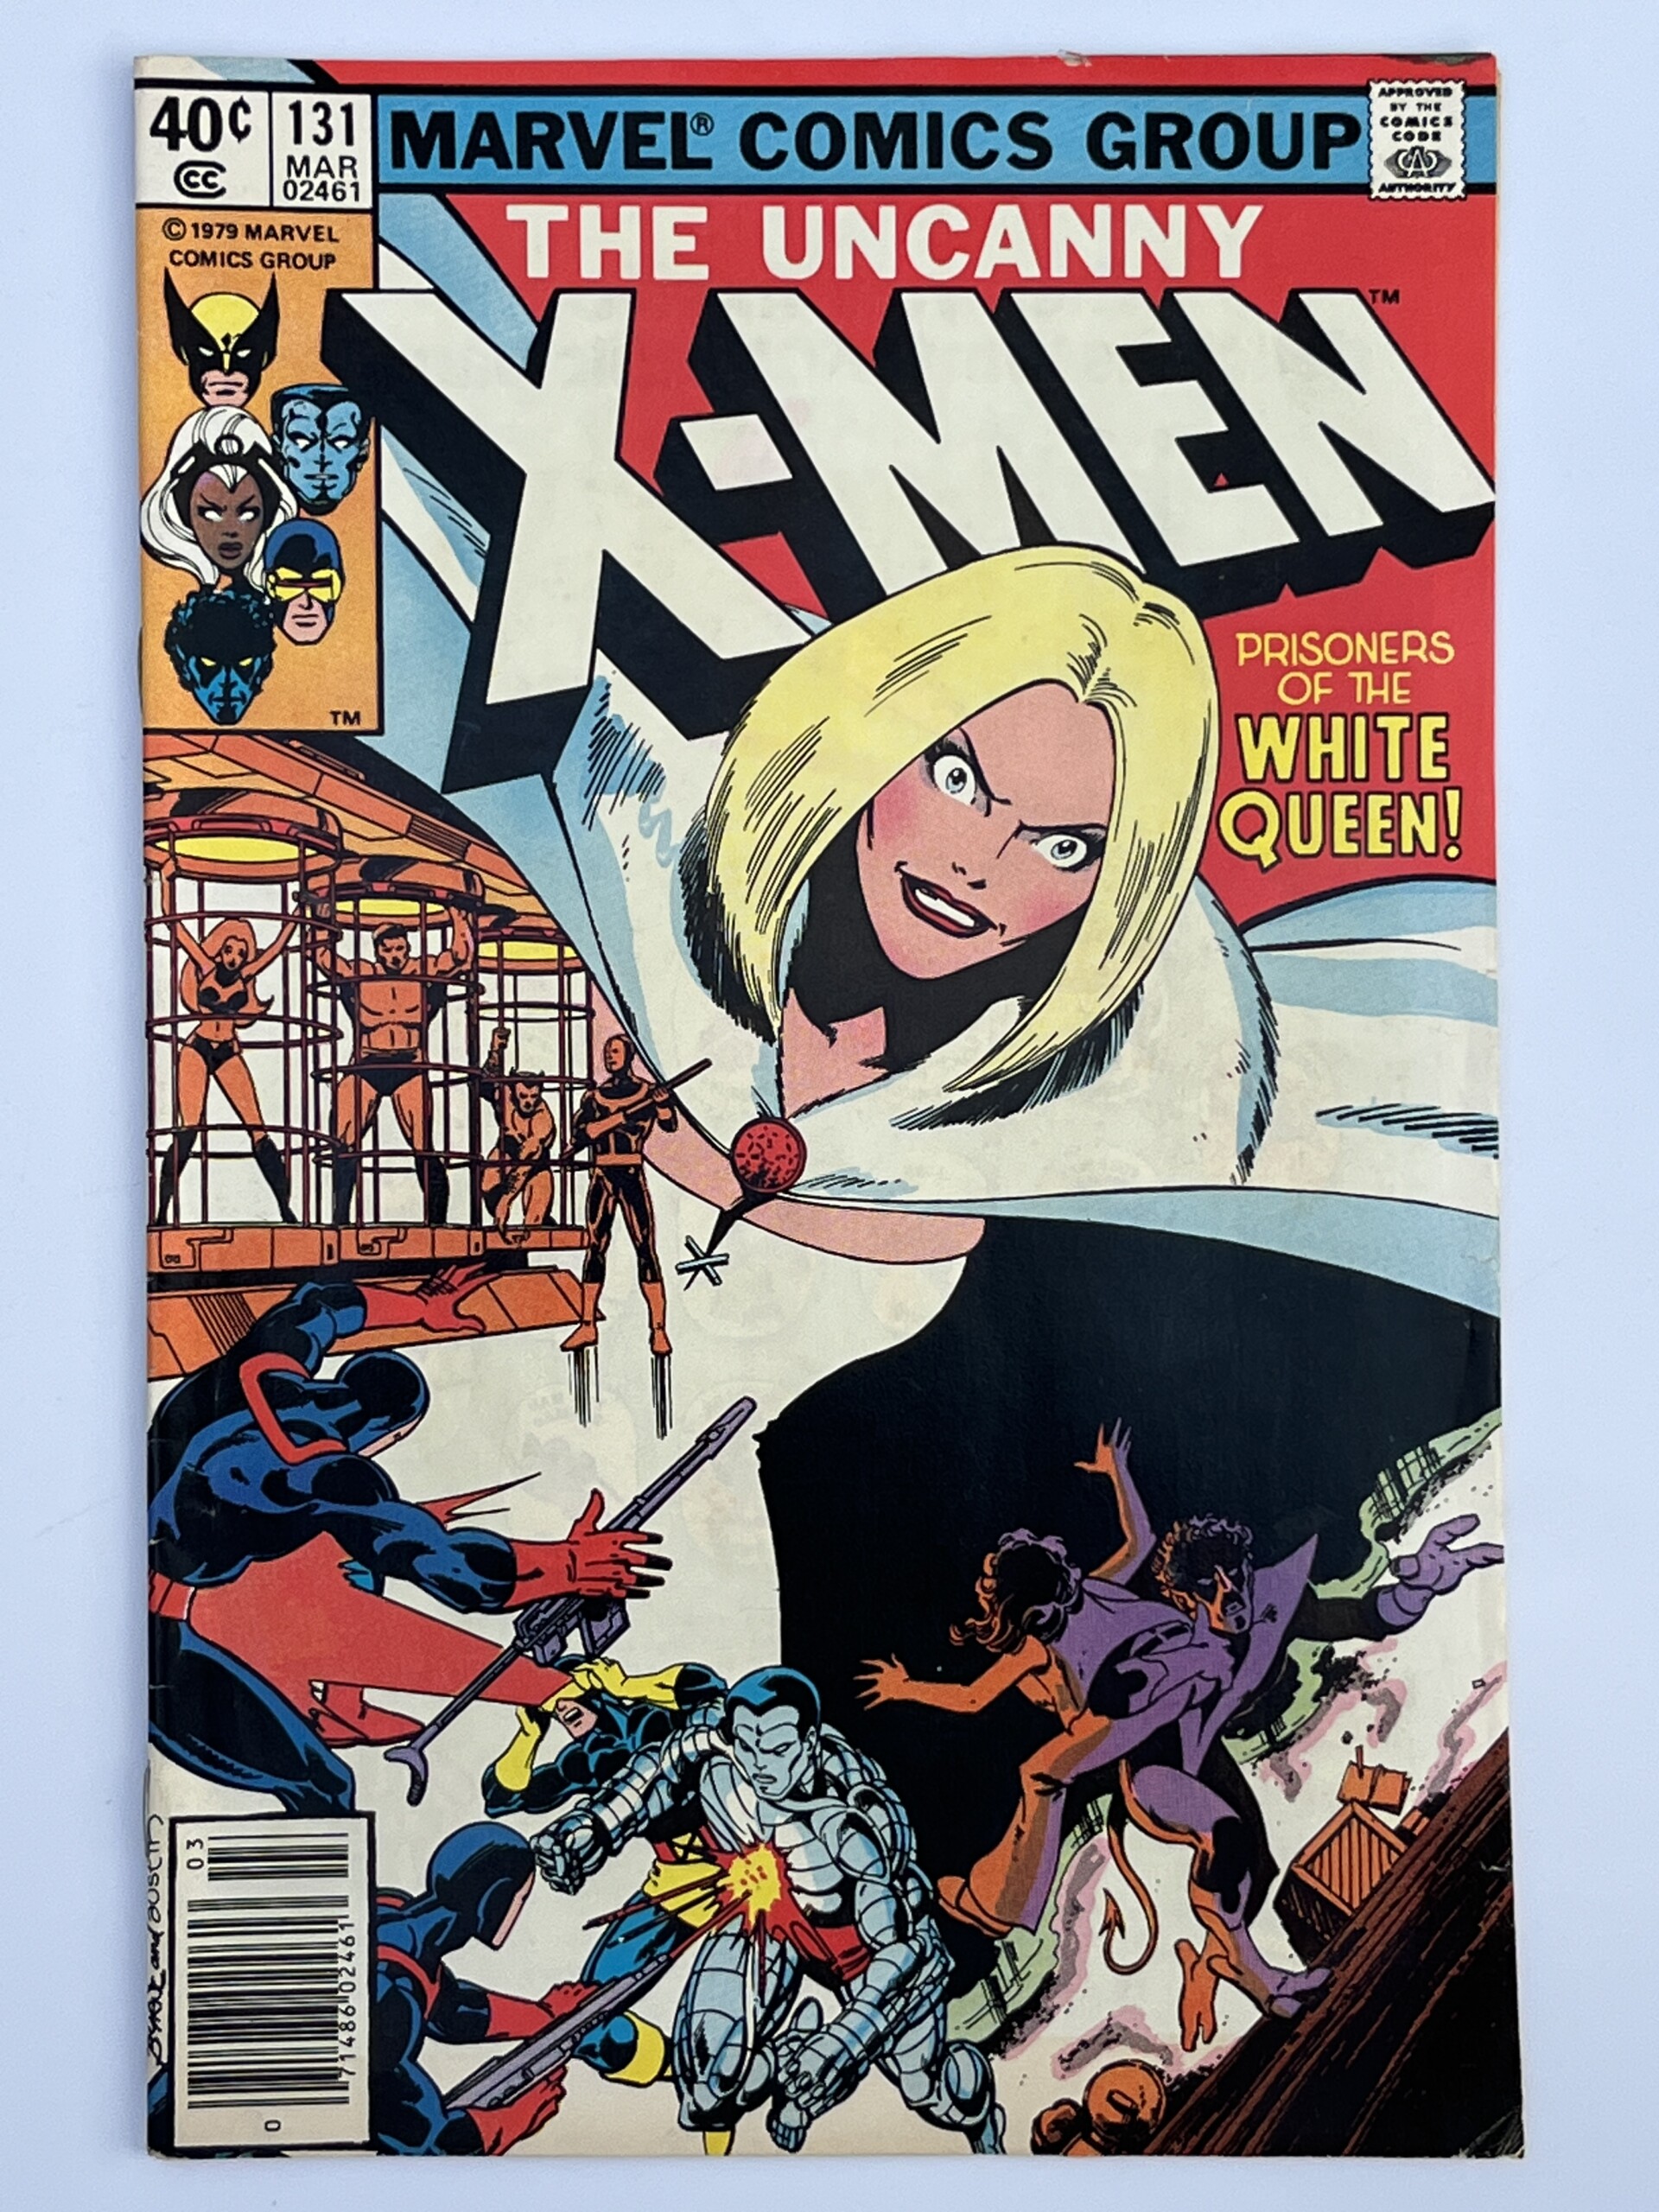 Uncanny X-Men #131 (1979) 1st cover appearance of Emma Frost, The White Queen...